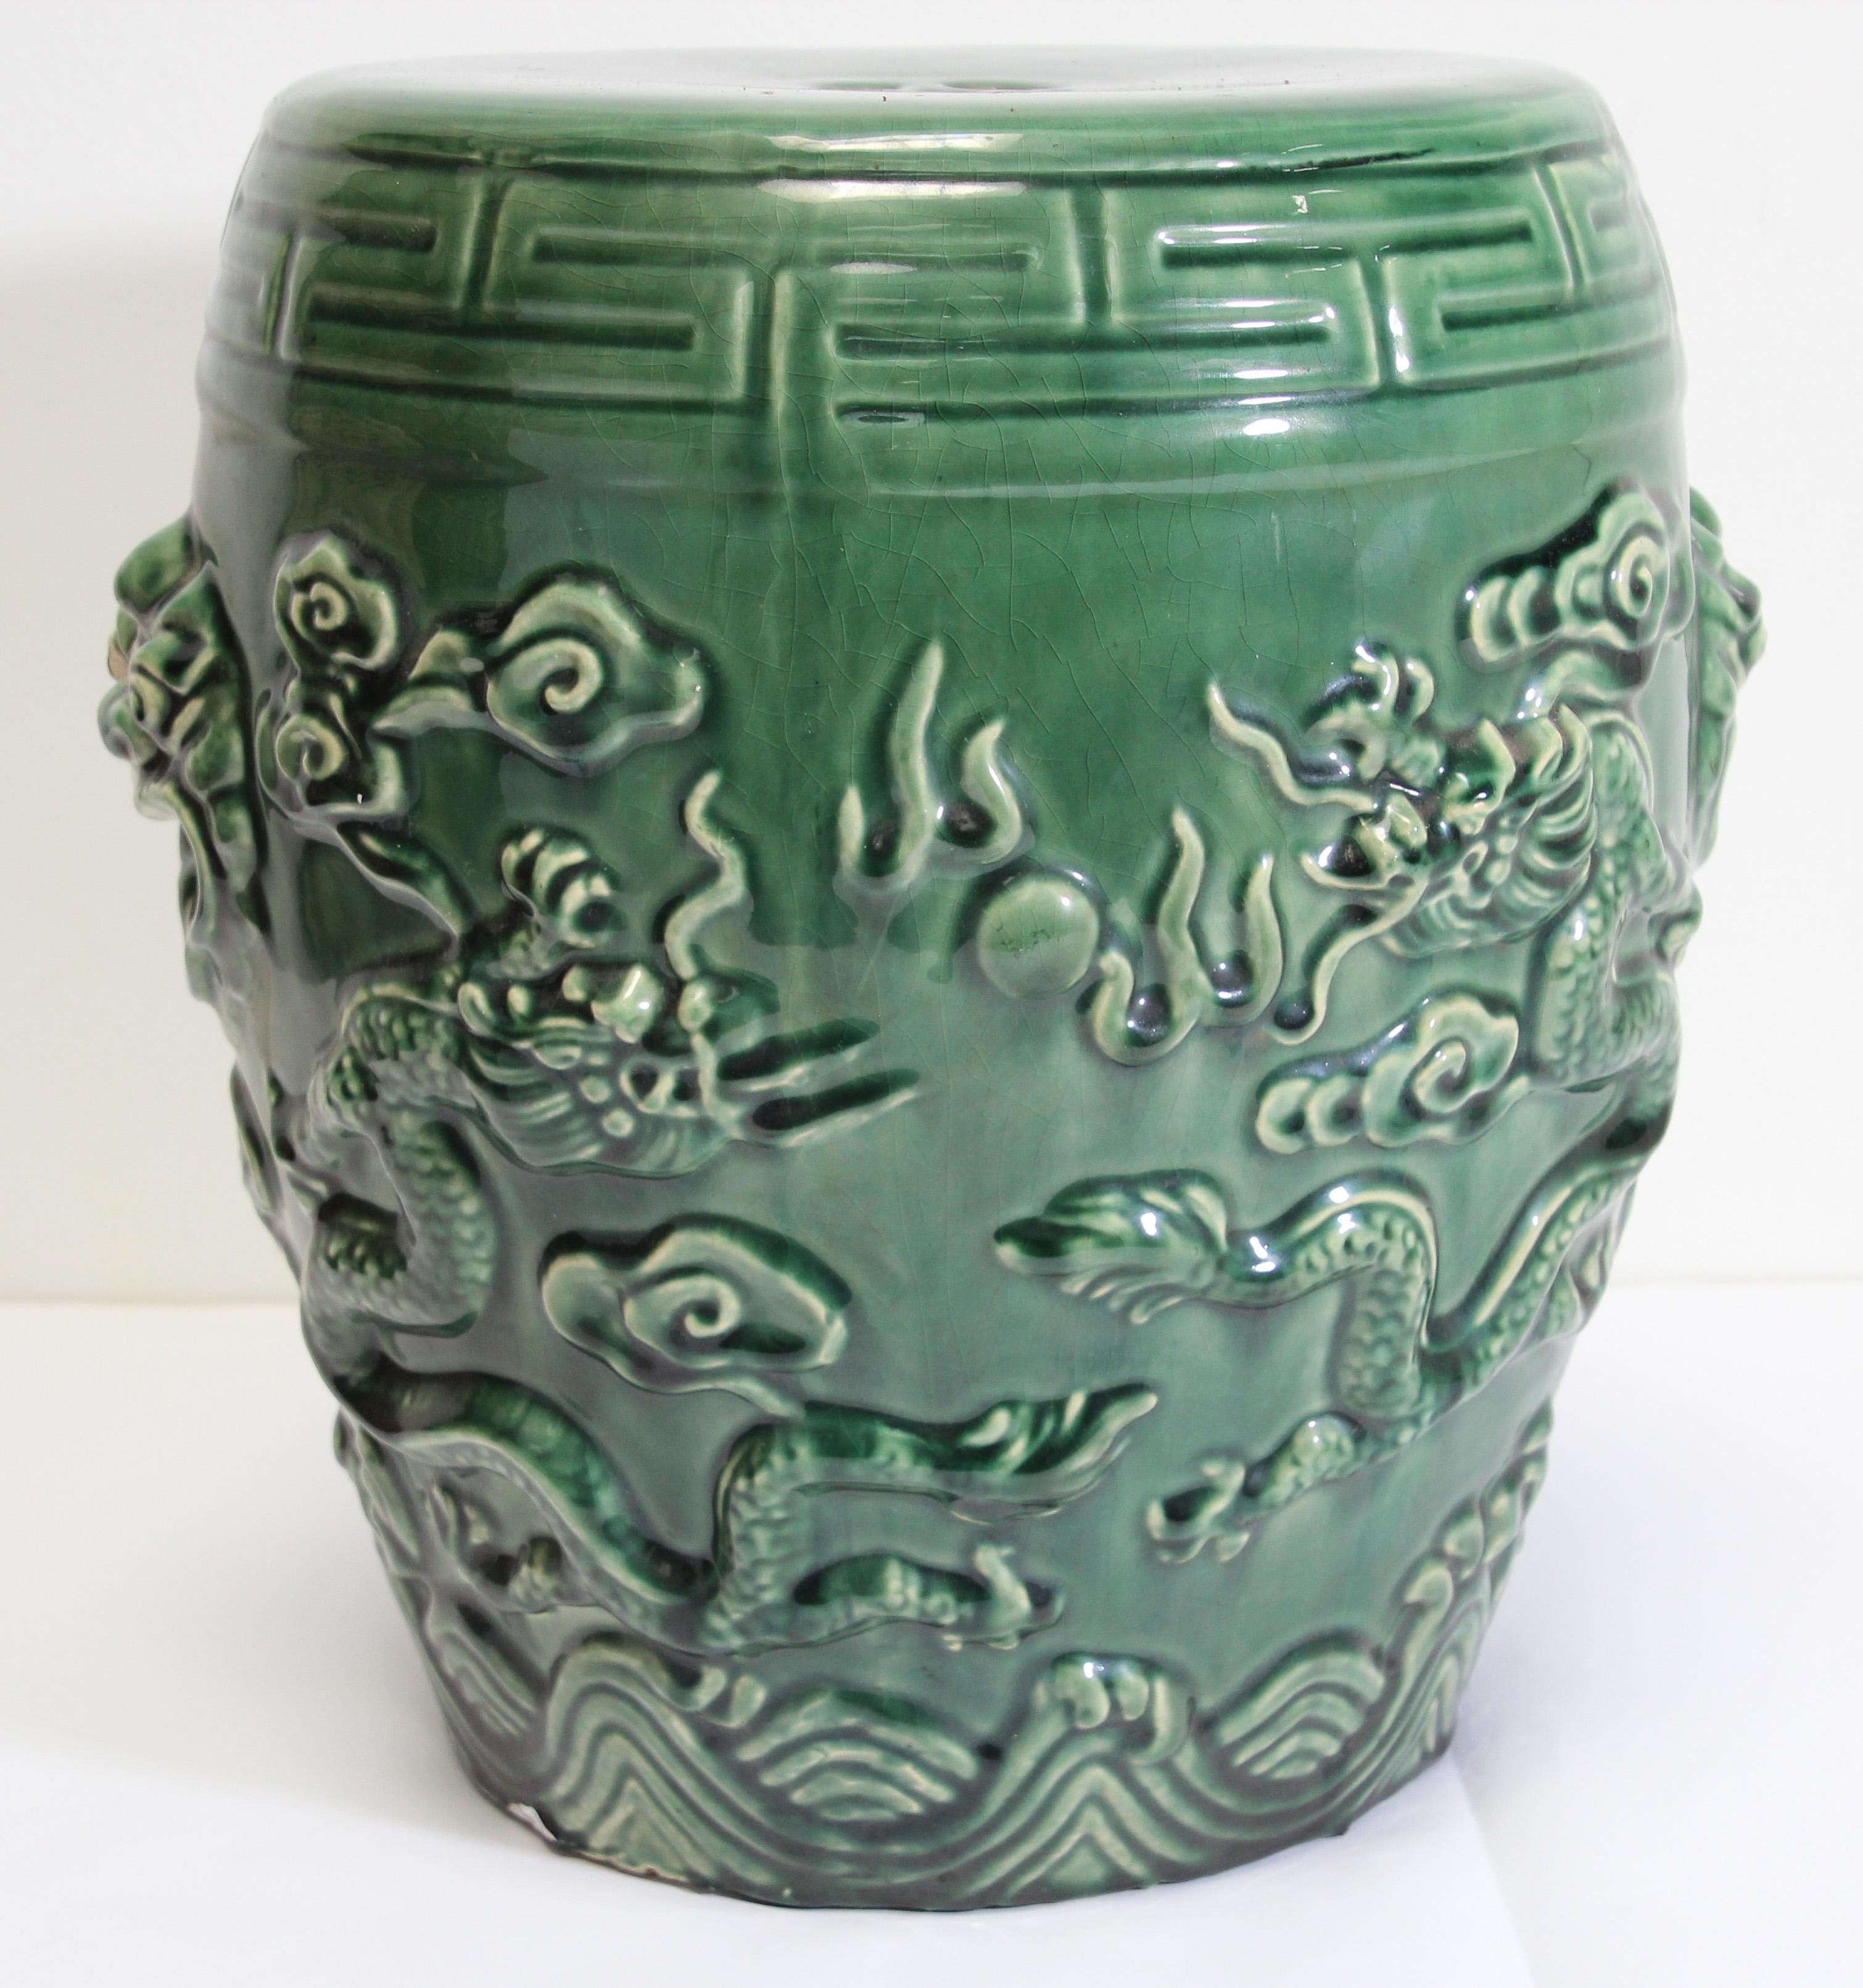 Emerald green Chinese ceramic garden stool.
Nicely carved on each sides with foliages and dragons.
Fen Shui designs with water, dragons and foliages
Great to use indoor or outdoor as a stool, end table, or plant stand.
Light, easy to carry